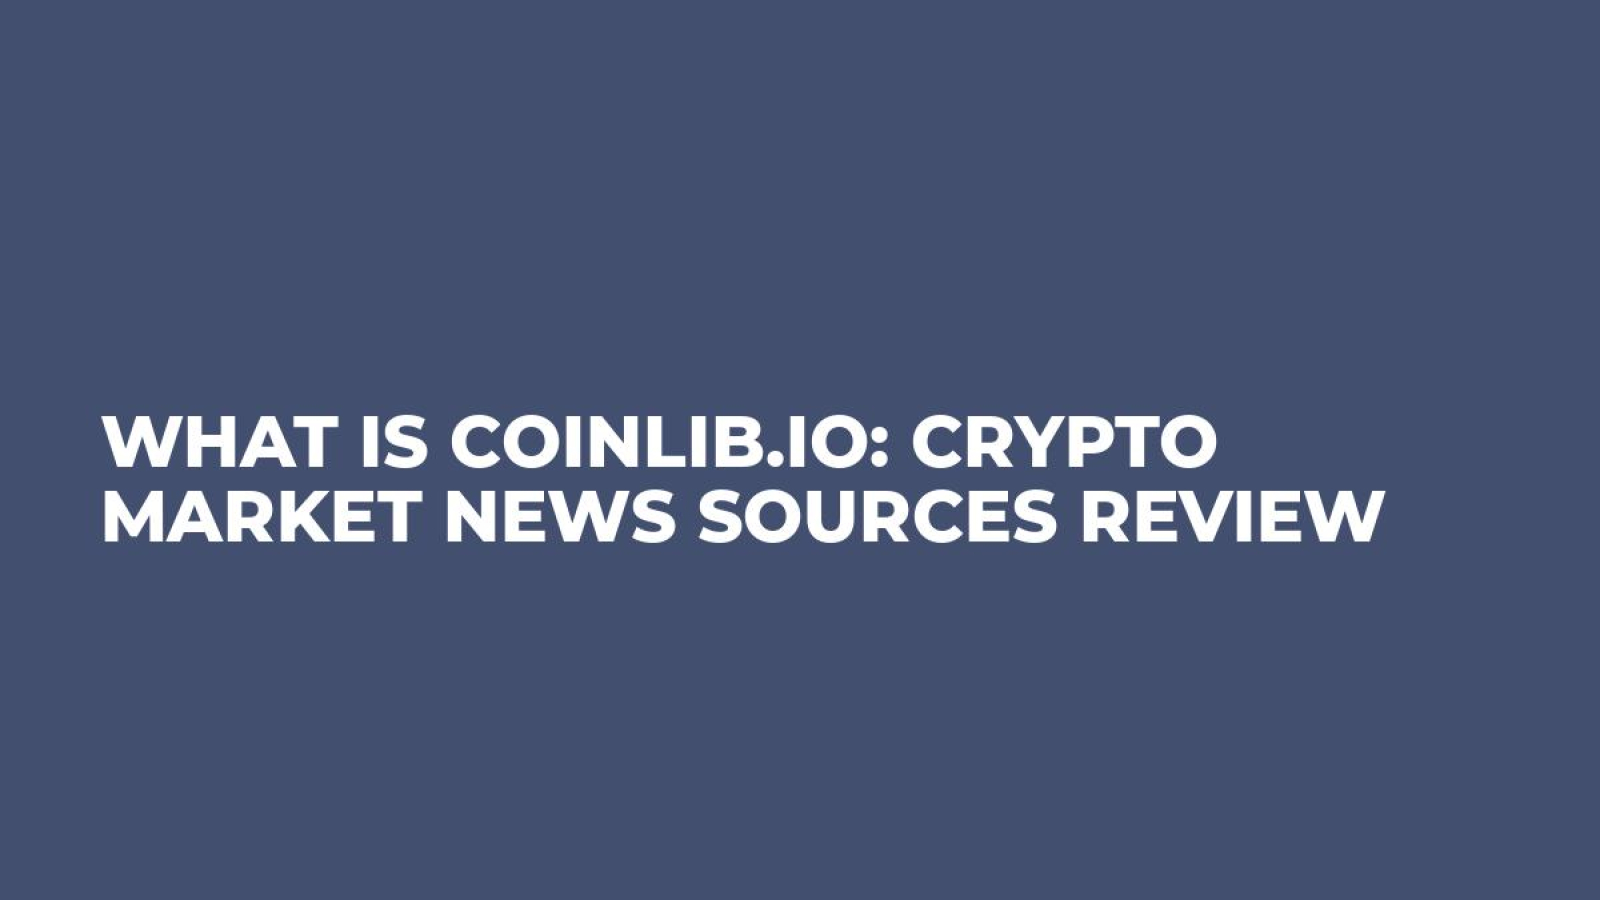 What is Coinlib.io: Crypto Market News Sources Review